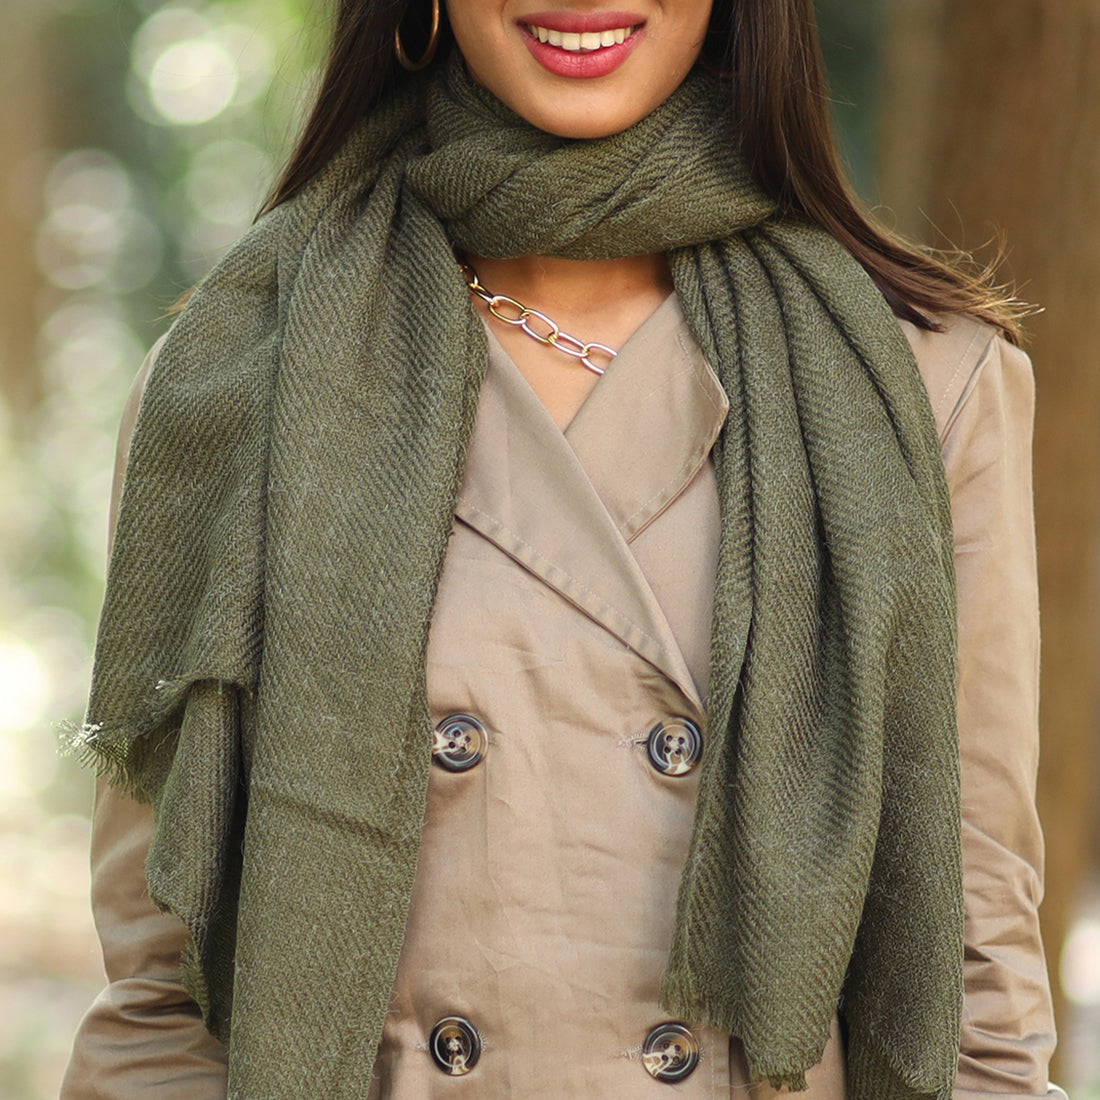 CONTEMPORARY SOLID OLIVE GREEN ACRYLIC WINTER SCARF